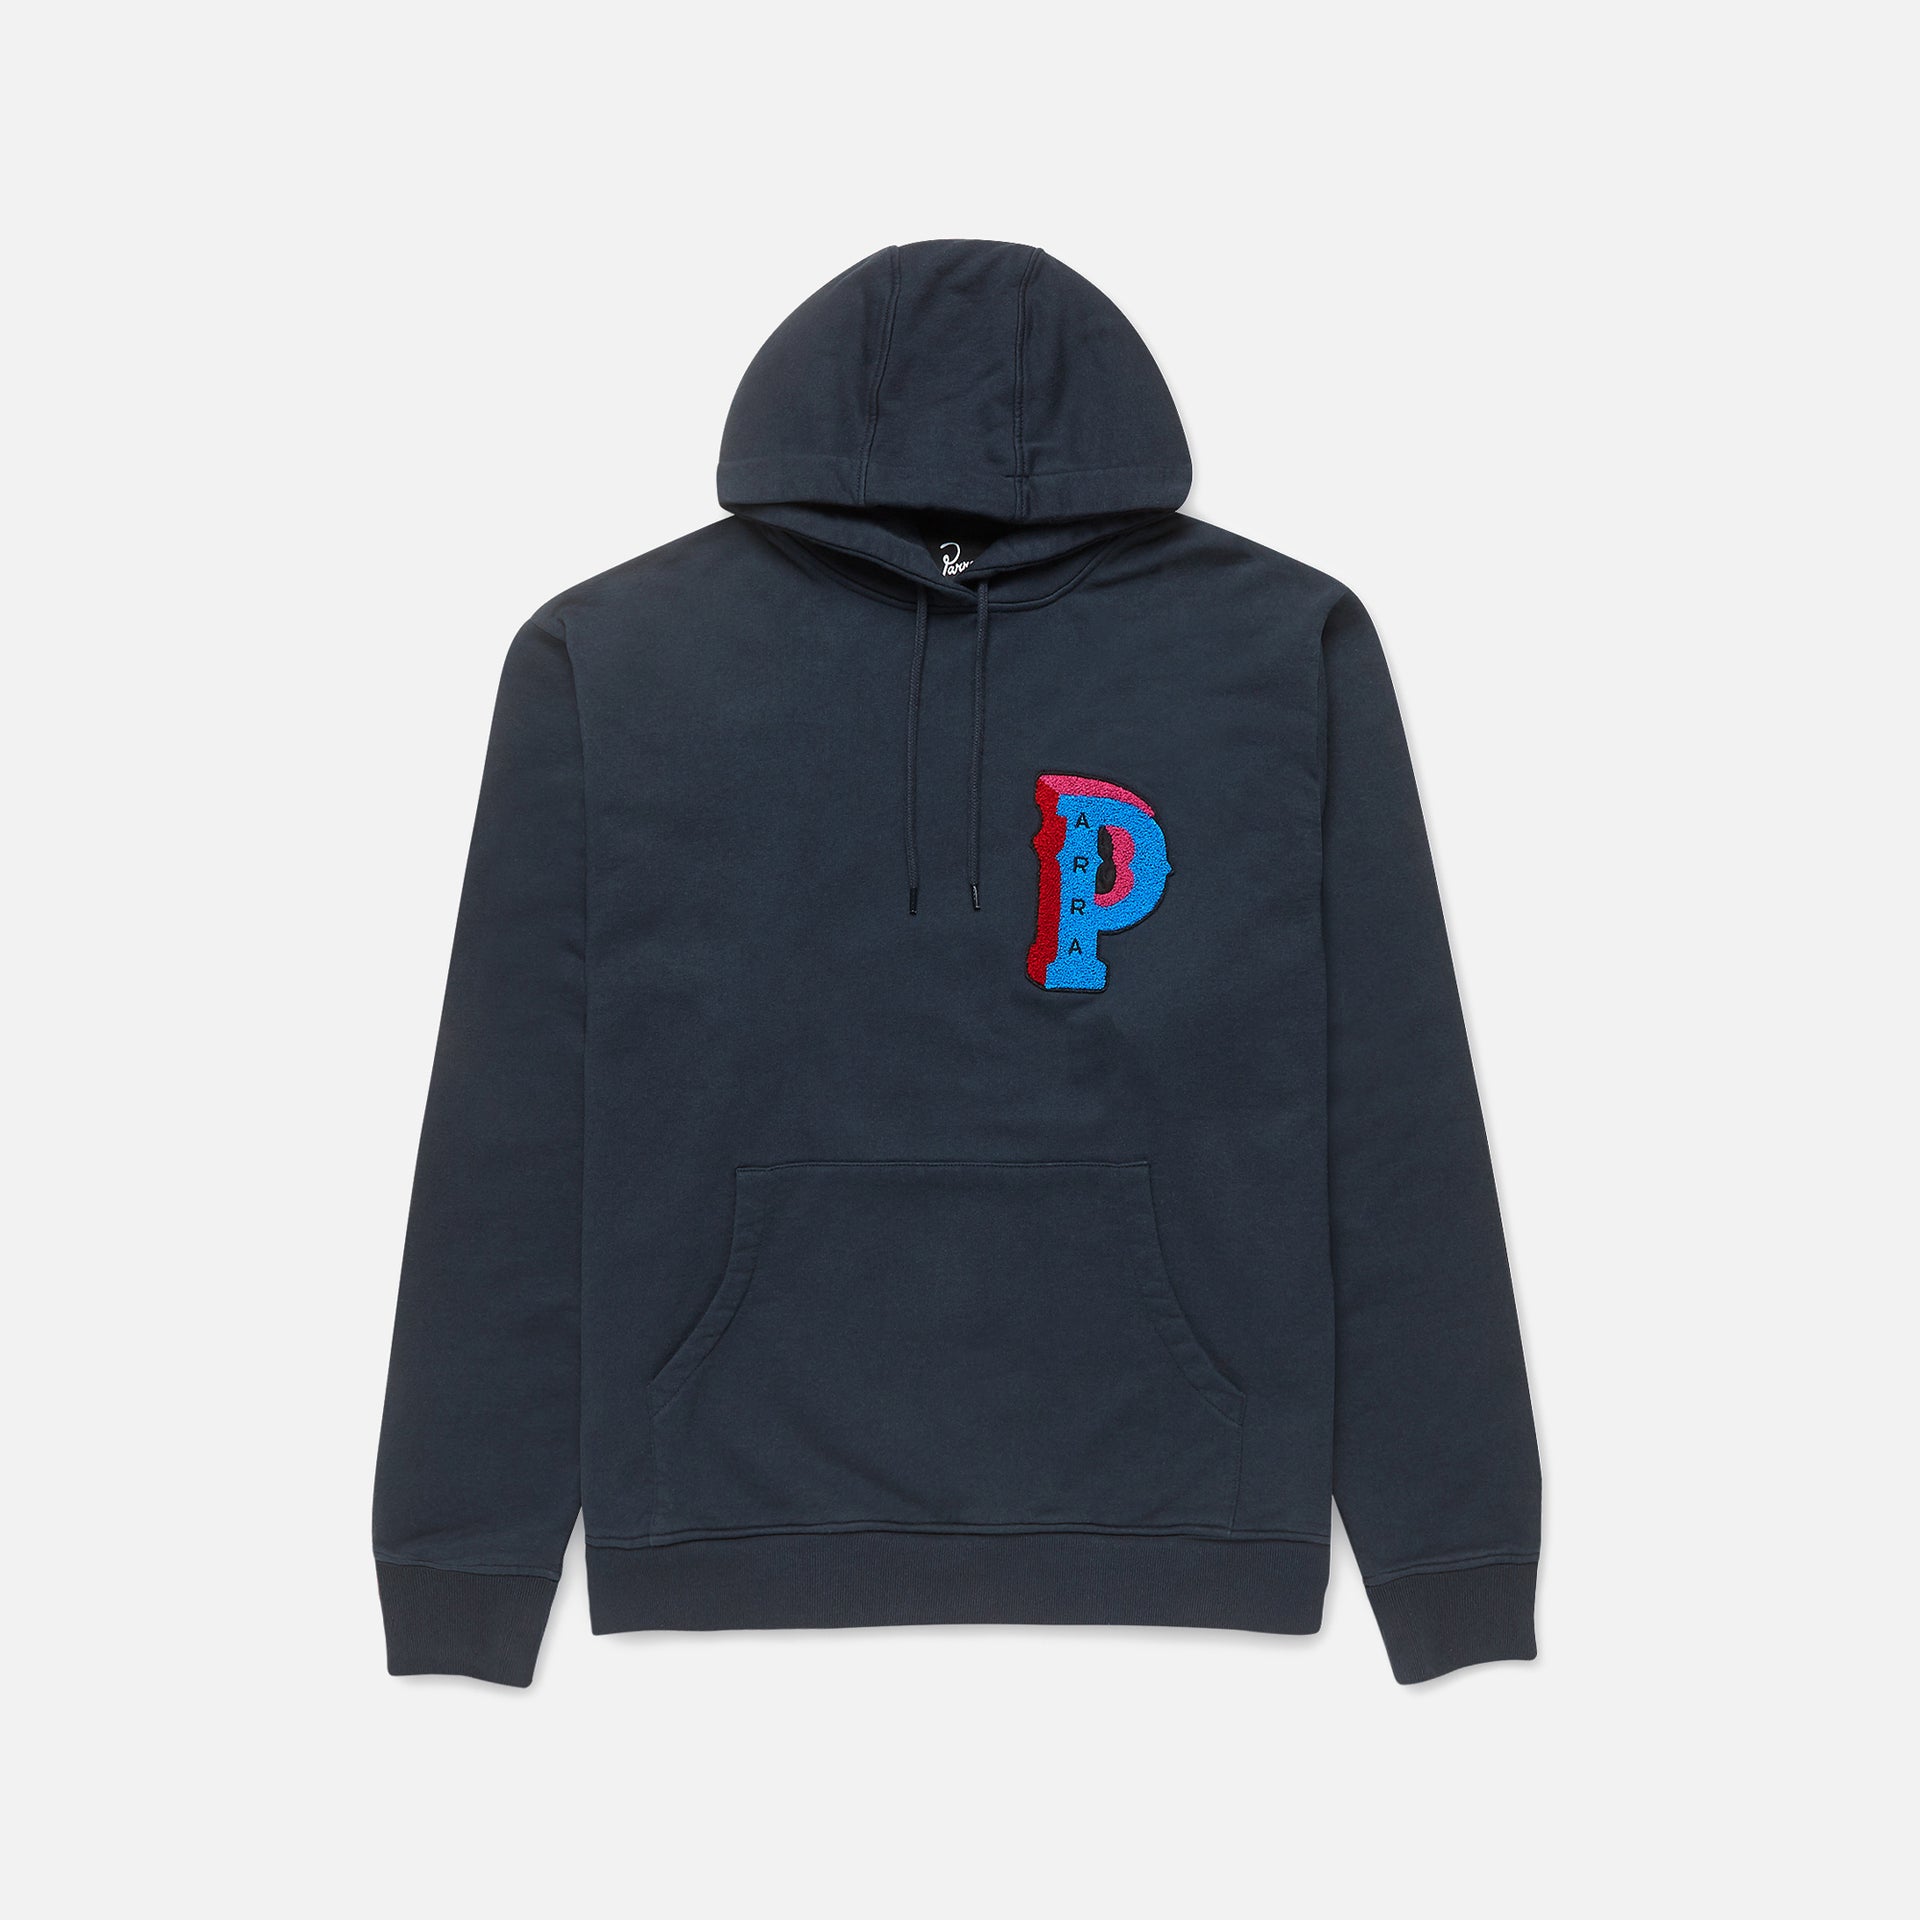 by Parra Dropped Out Hooded Sweatshirt - Navy